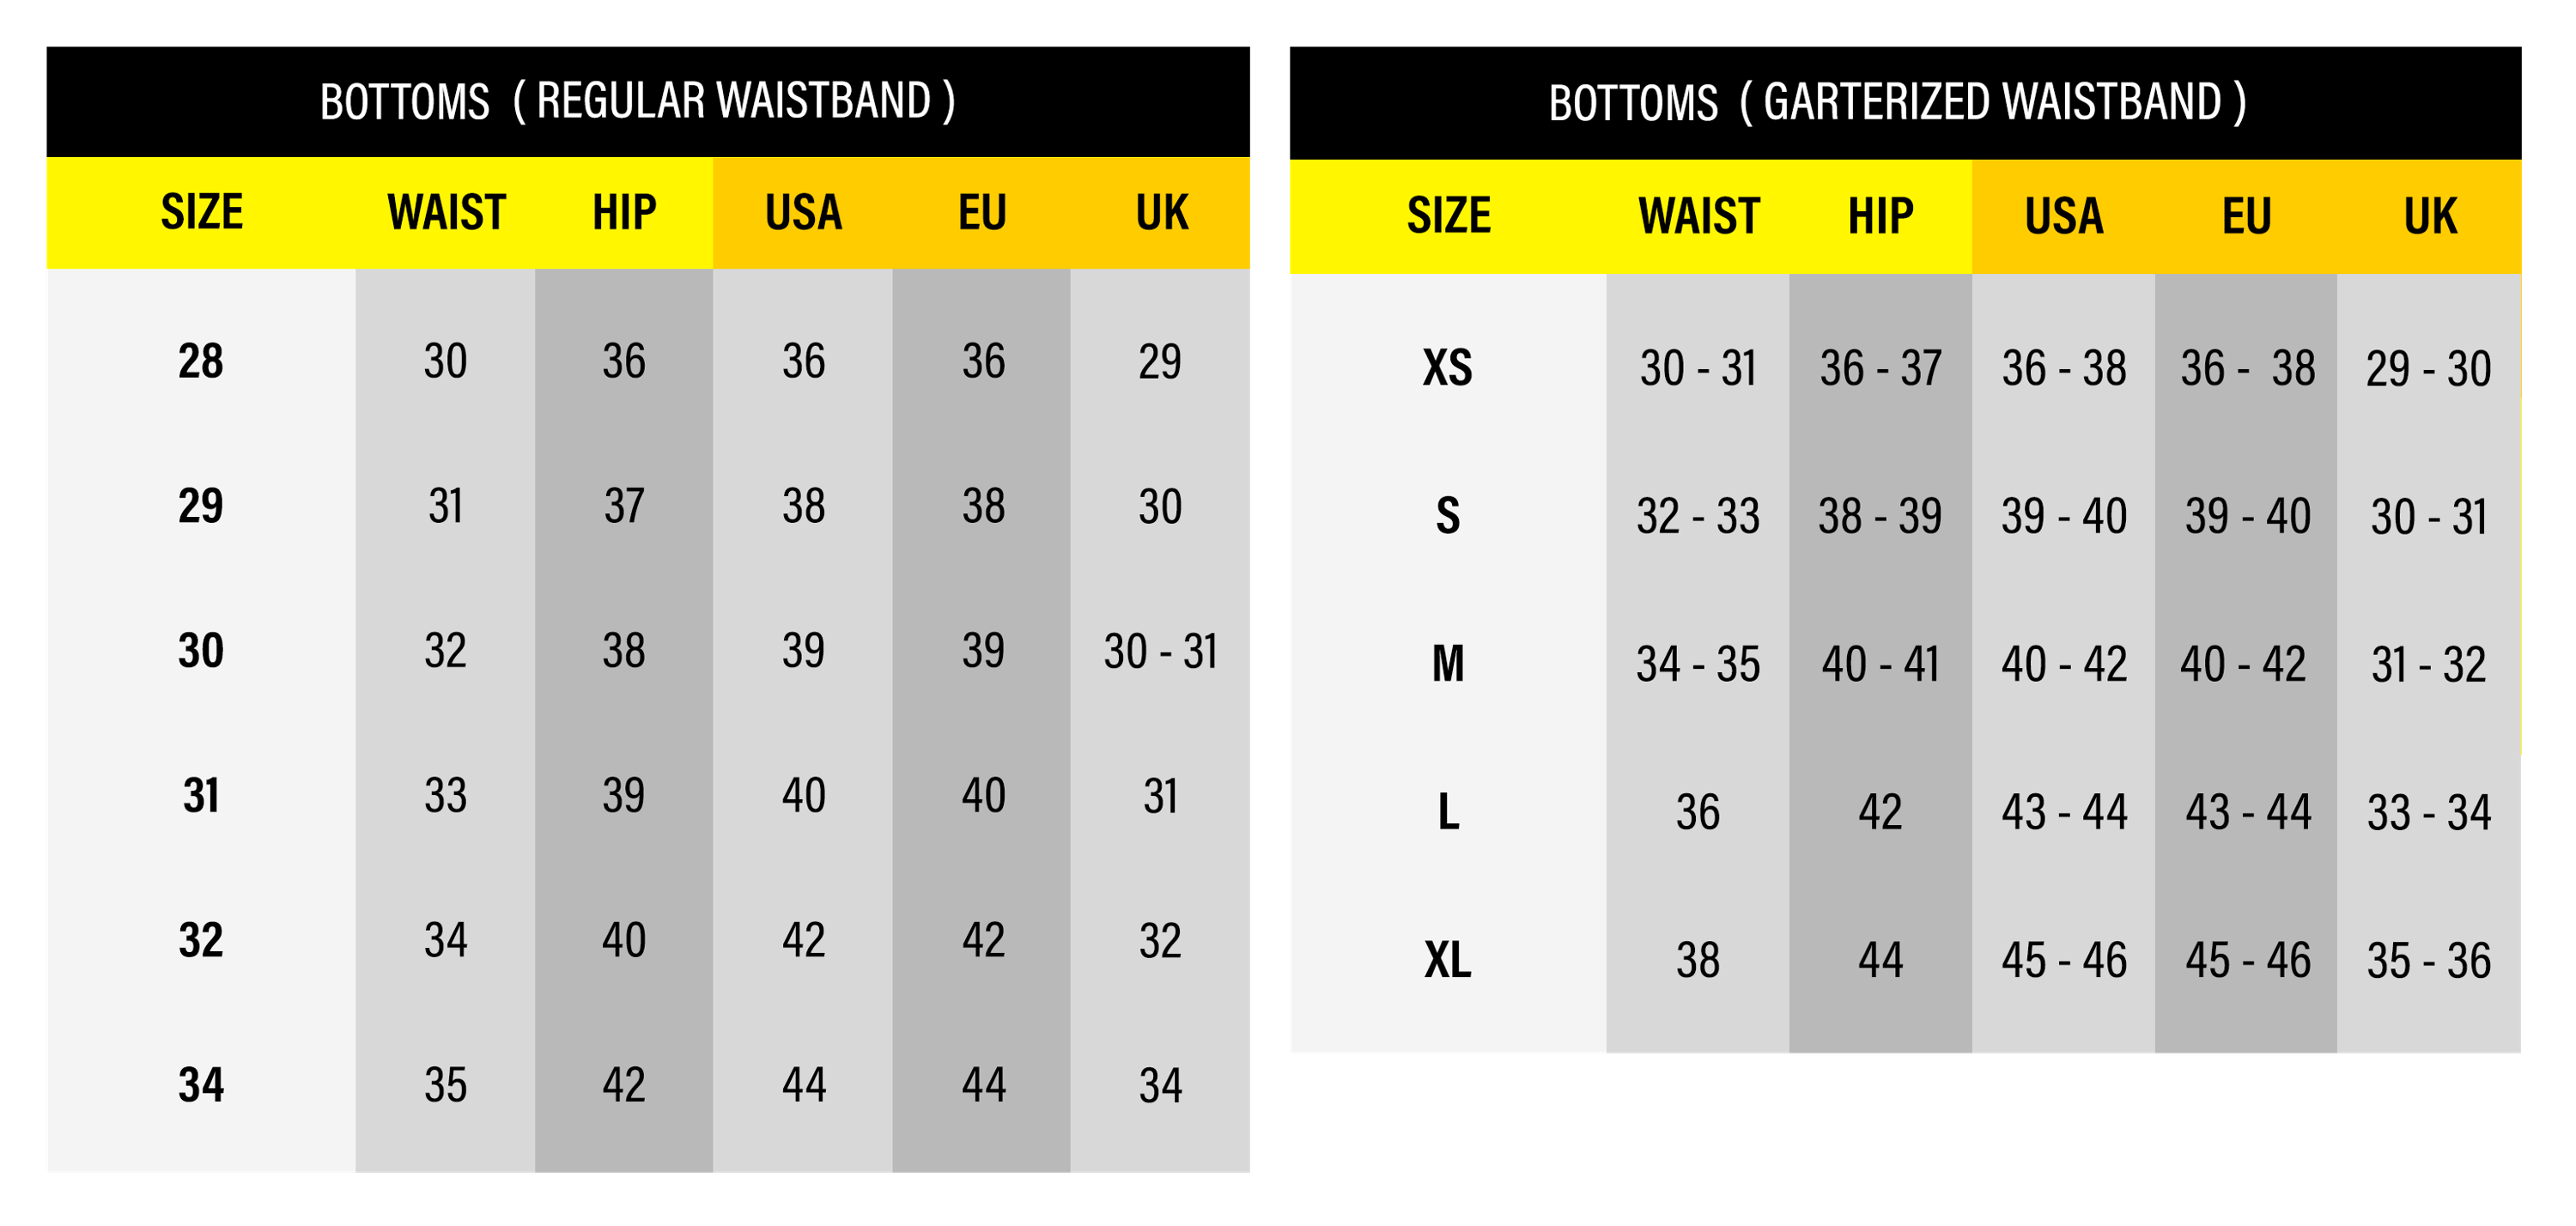 the north face t shirt size guide